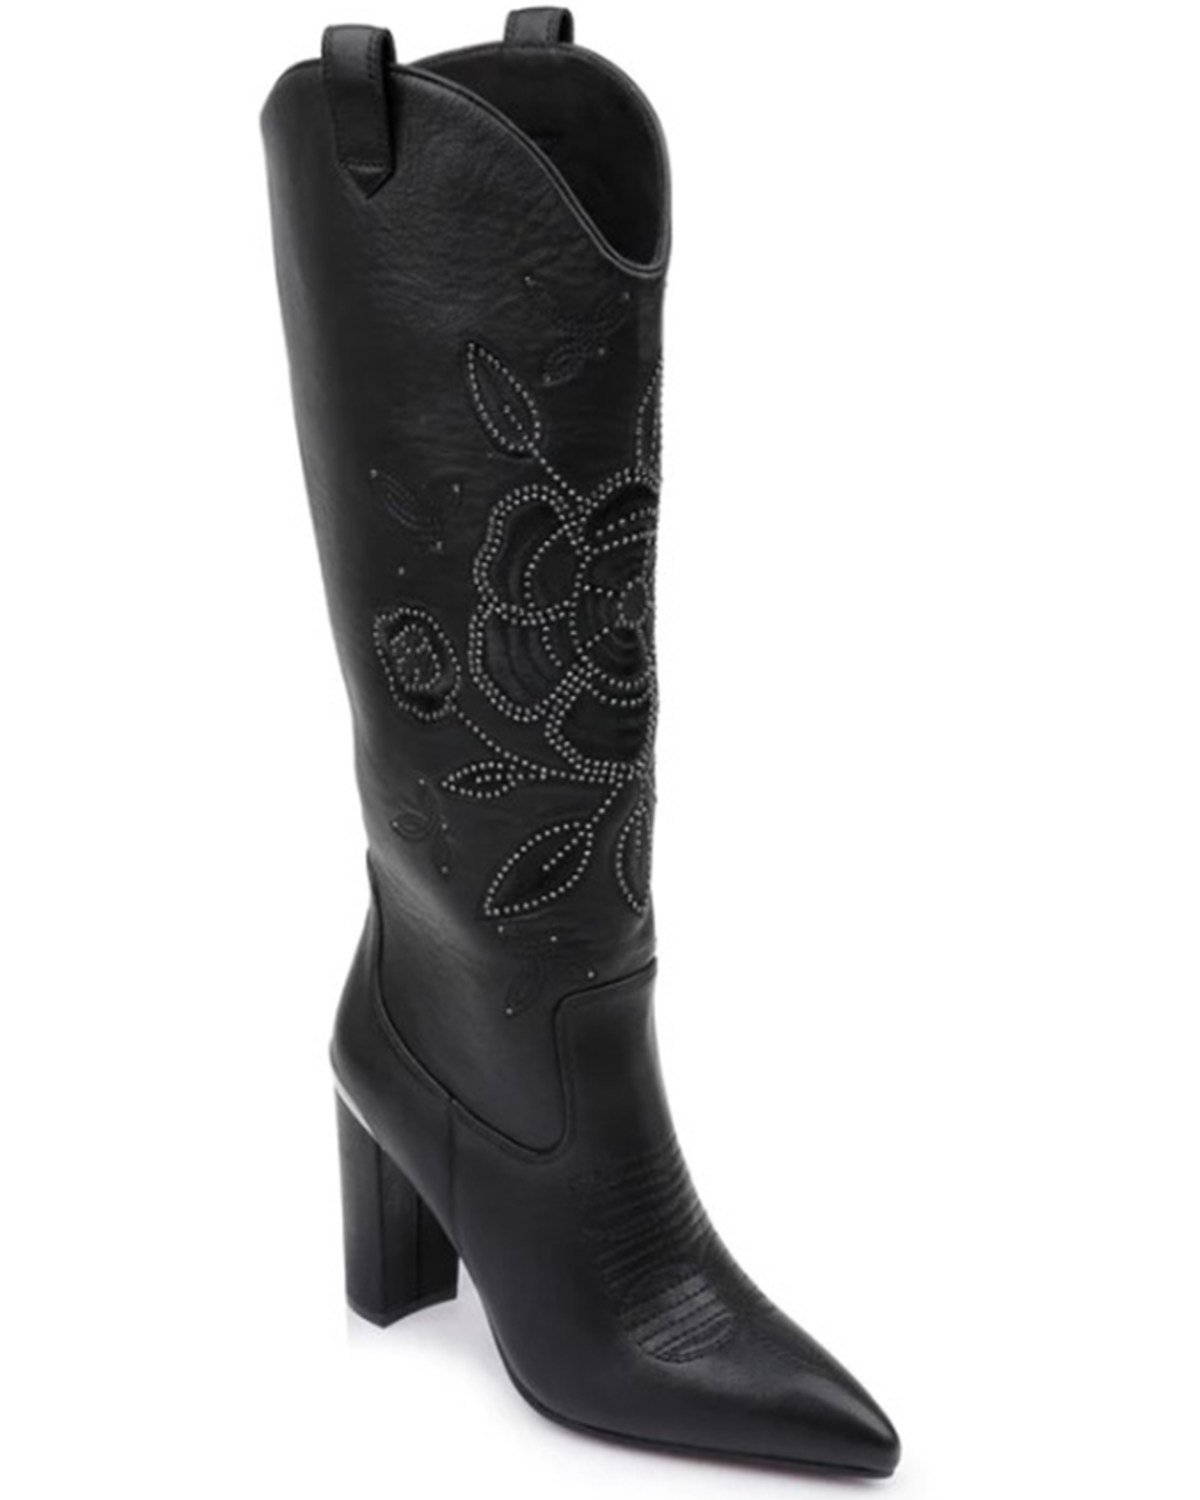 DanielXDiamond Women's Acadia Embroidered Western Boots - Pointed Toe